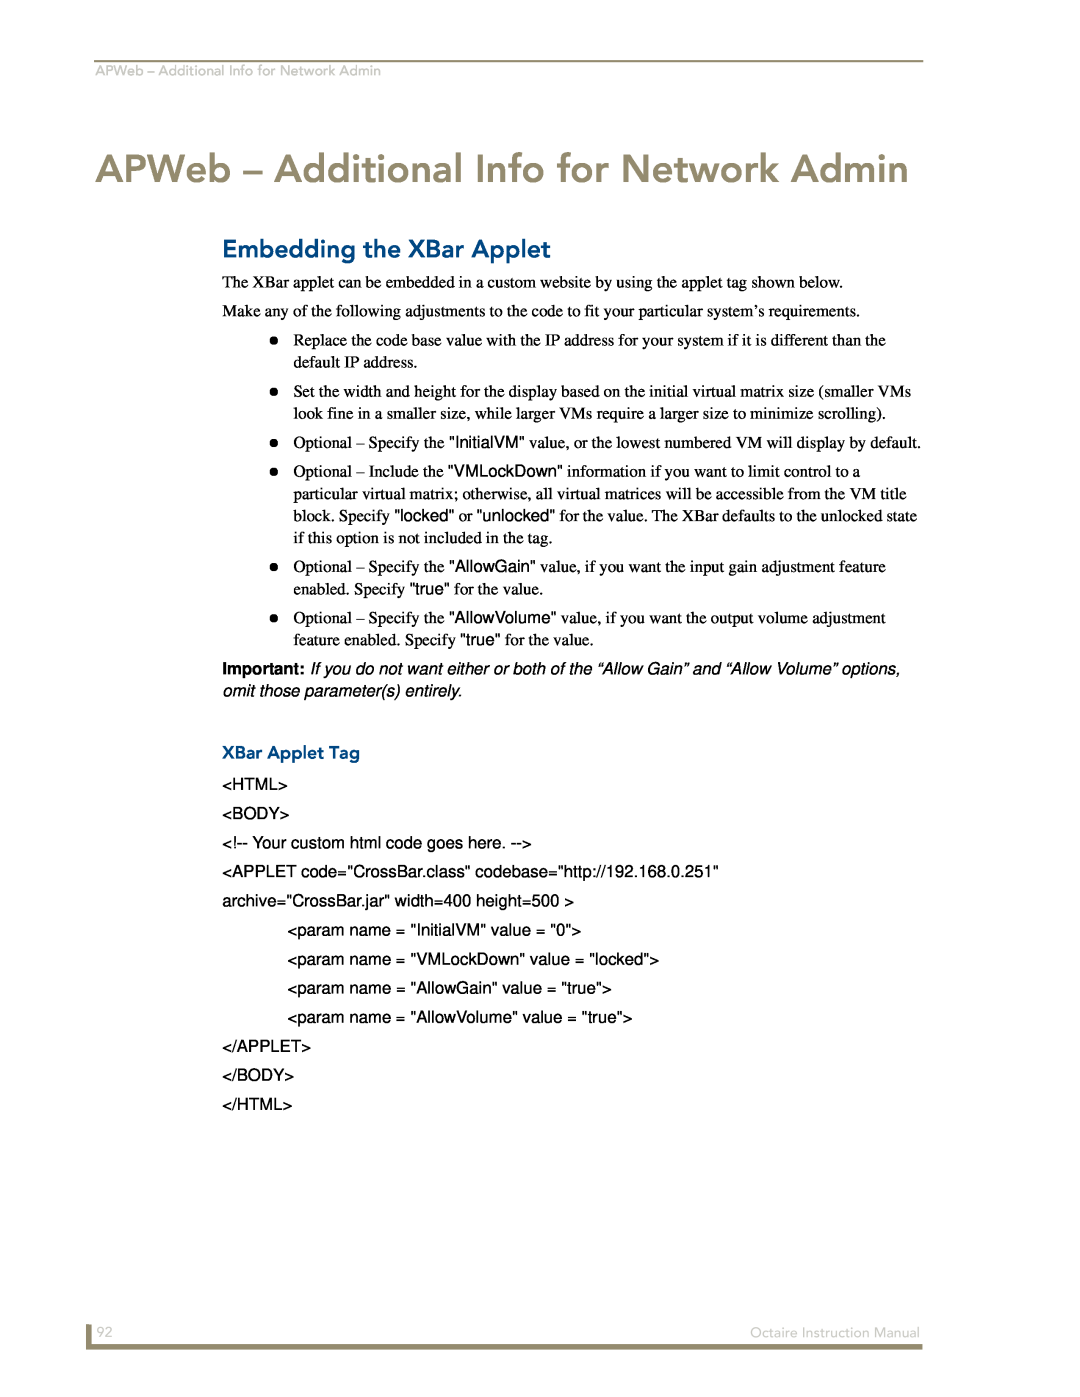 AMX Octaire instruction manual APWeb - Additional Info for Network Admin, Embedding the XBar Applet, XBar Applet Tag 